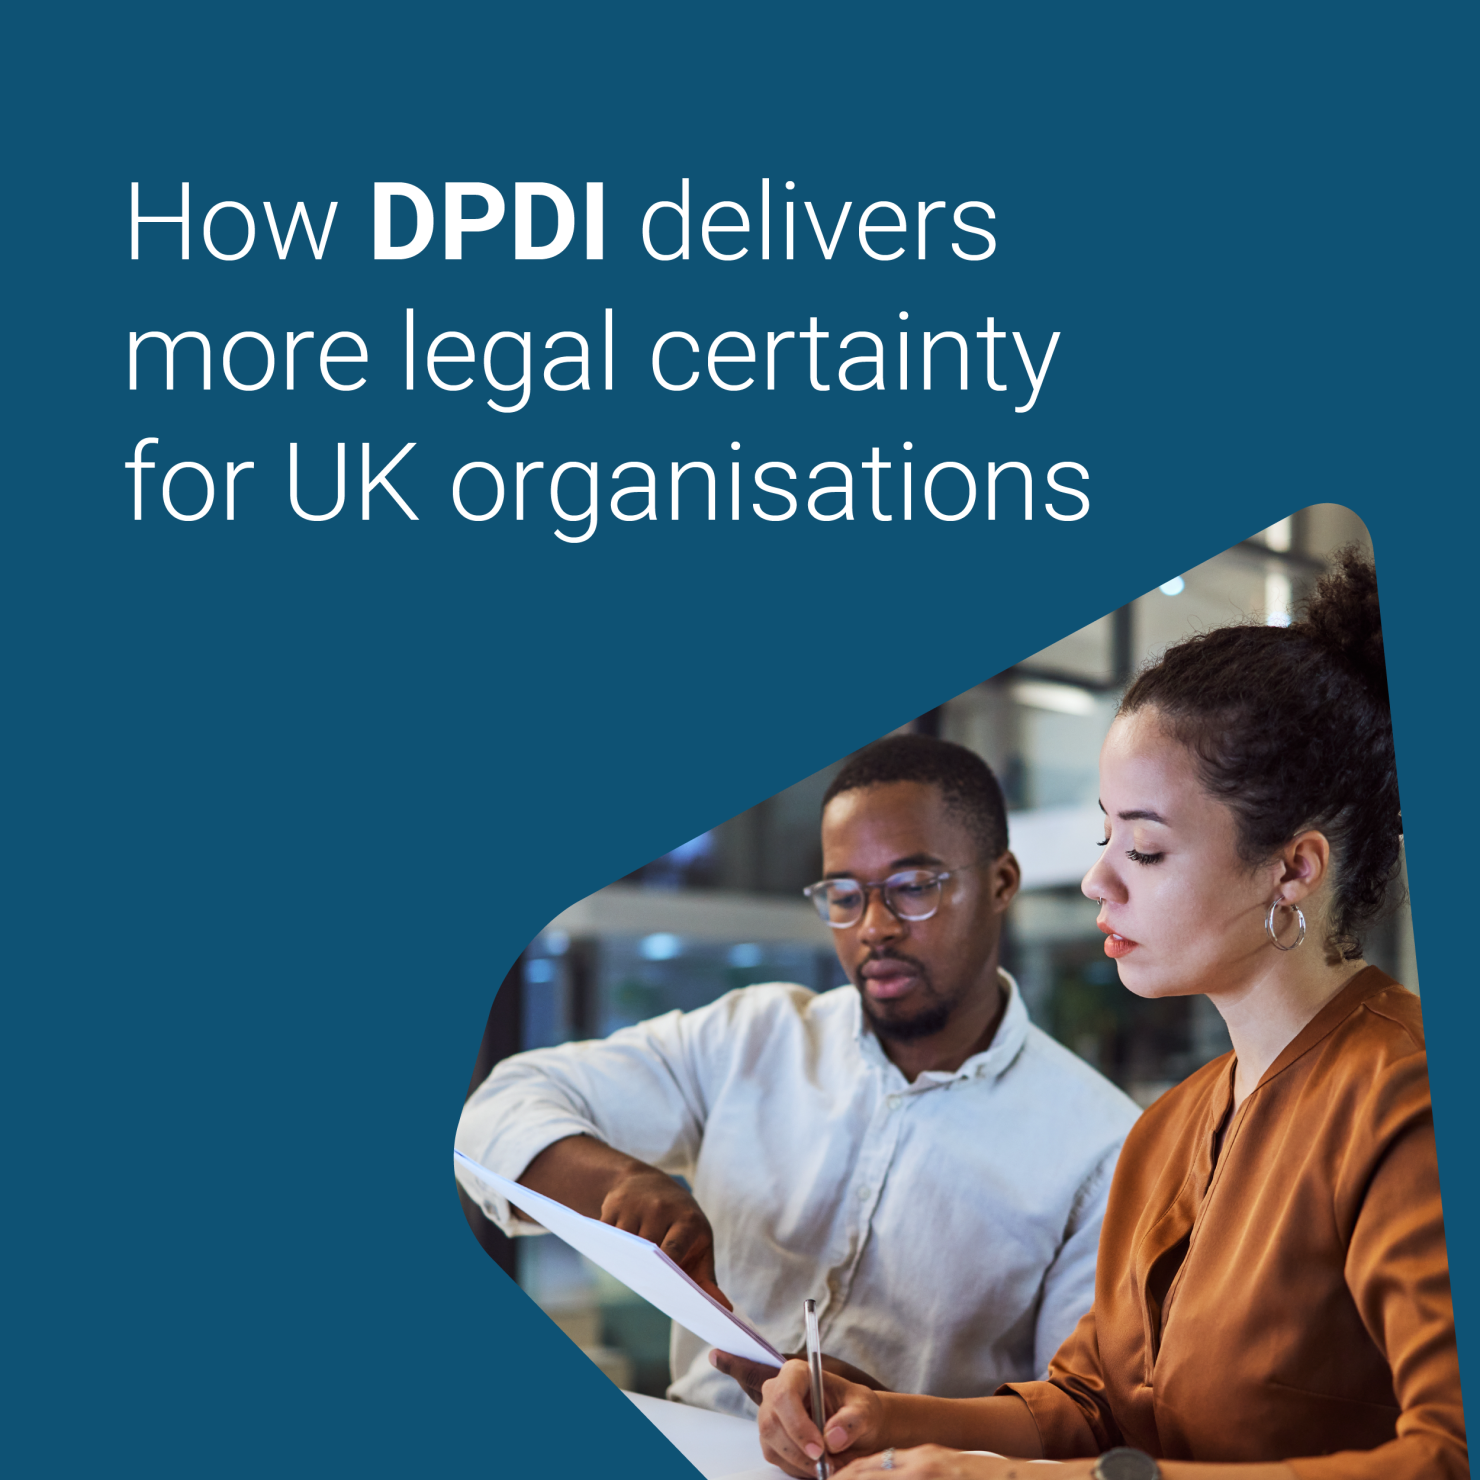 How DPDI delivers more legal certainty for UK organizations'